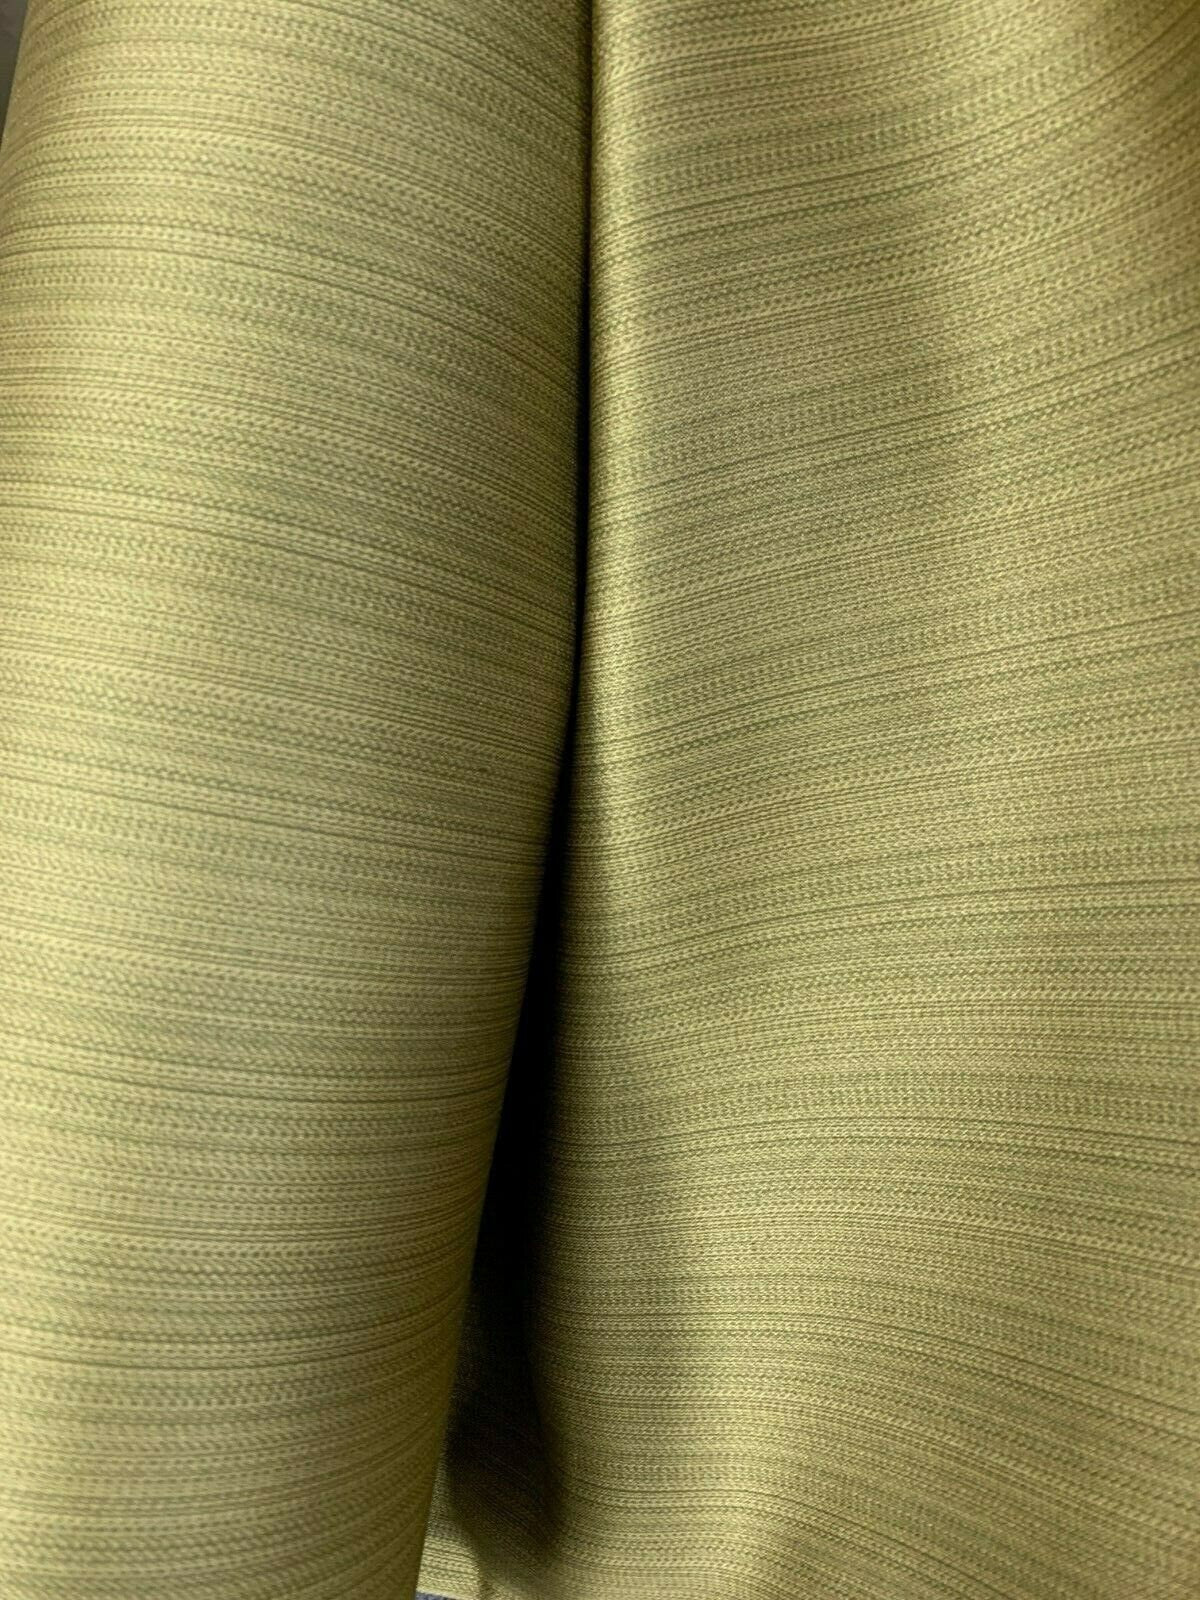 OLIVE GREEN Extra Wide Brocade Upholstery Drapery Fabric (110 in.) Sold By The Yard